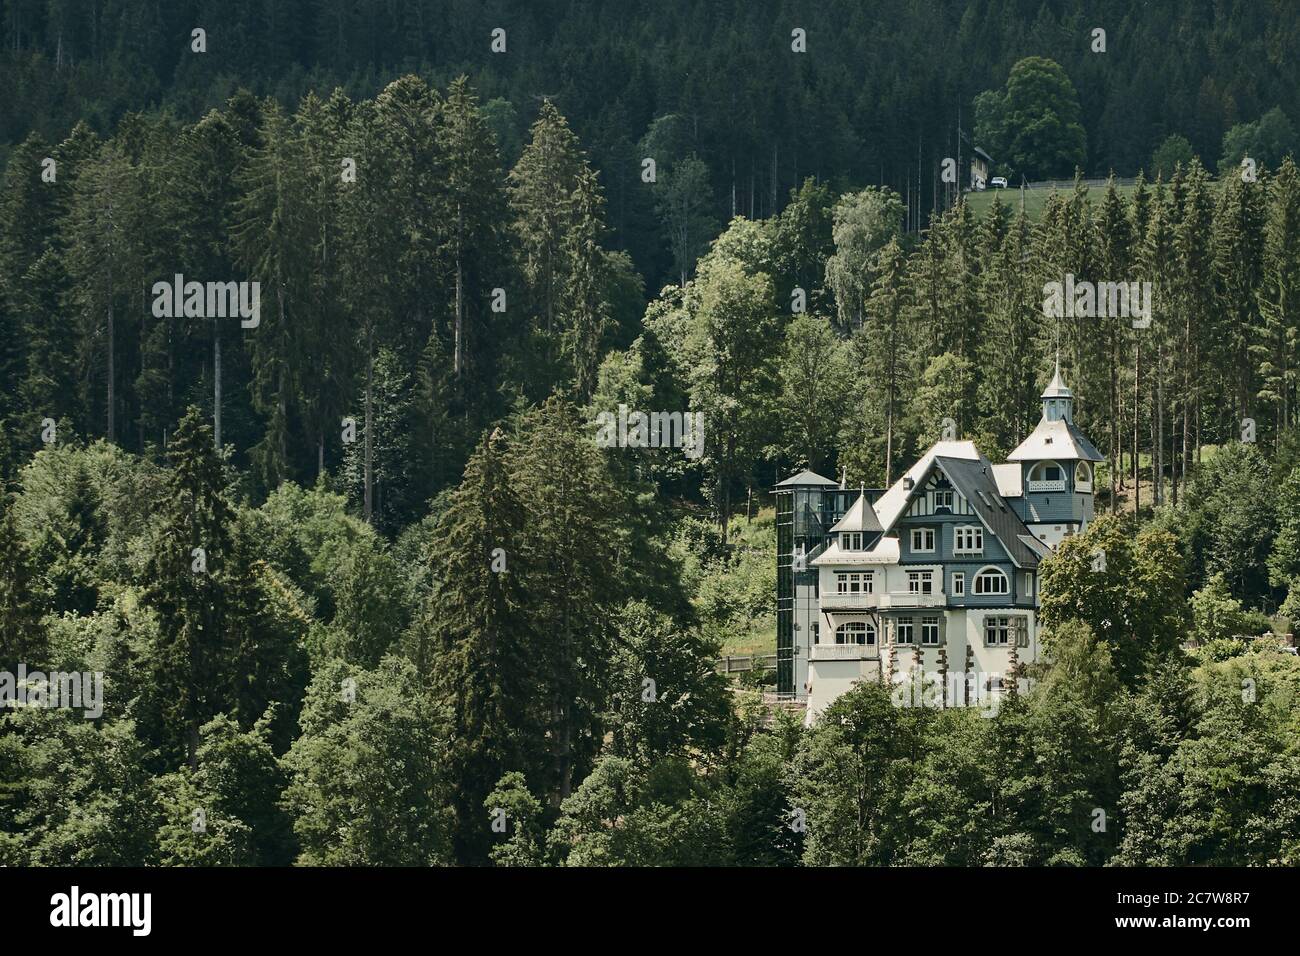 EnBW seminar and vacation house at lake Titisee, surrounded by green vegetation in the Black forest region Stock Photo